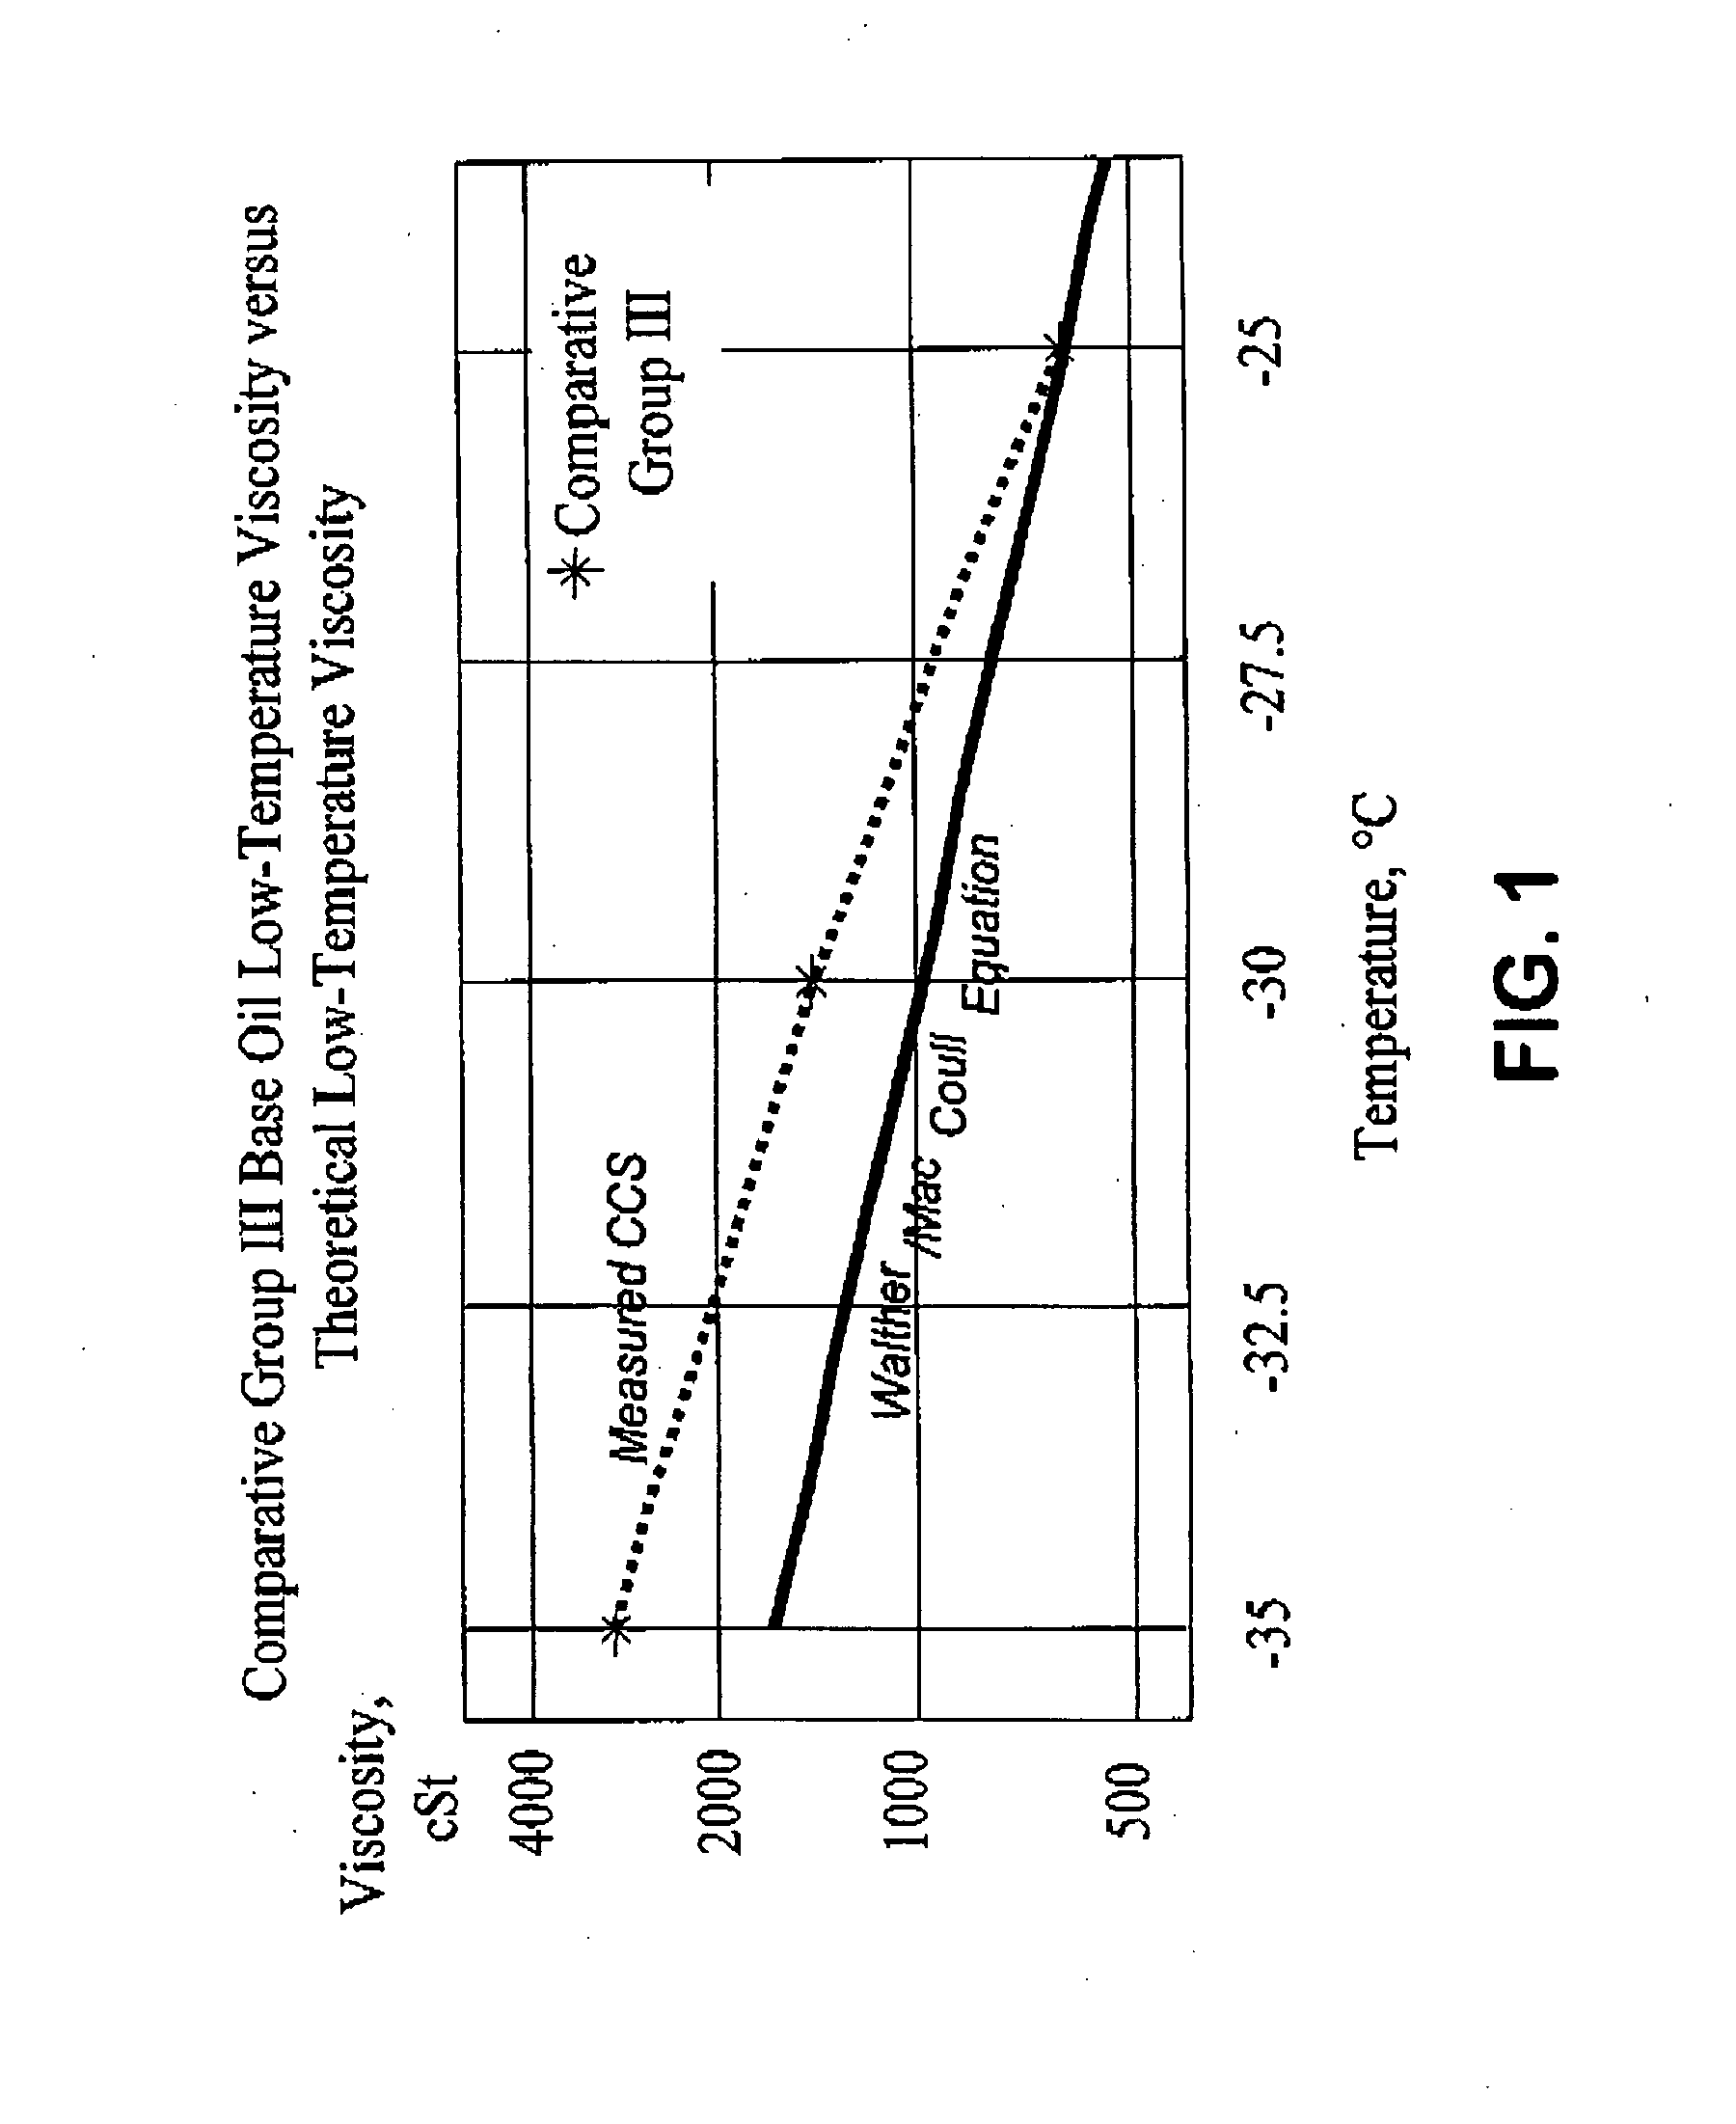 Functional fluids having low brookfield viscosity using high viscosity-index base stocks, base oils and lubricant compositions, and methods for their production and use